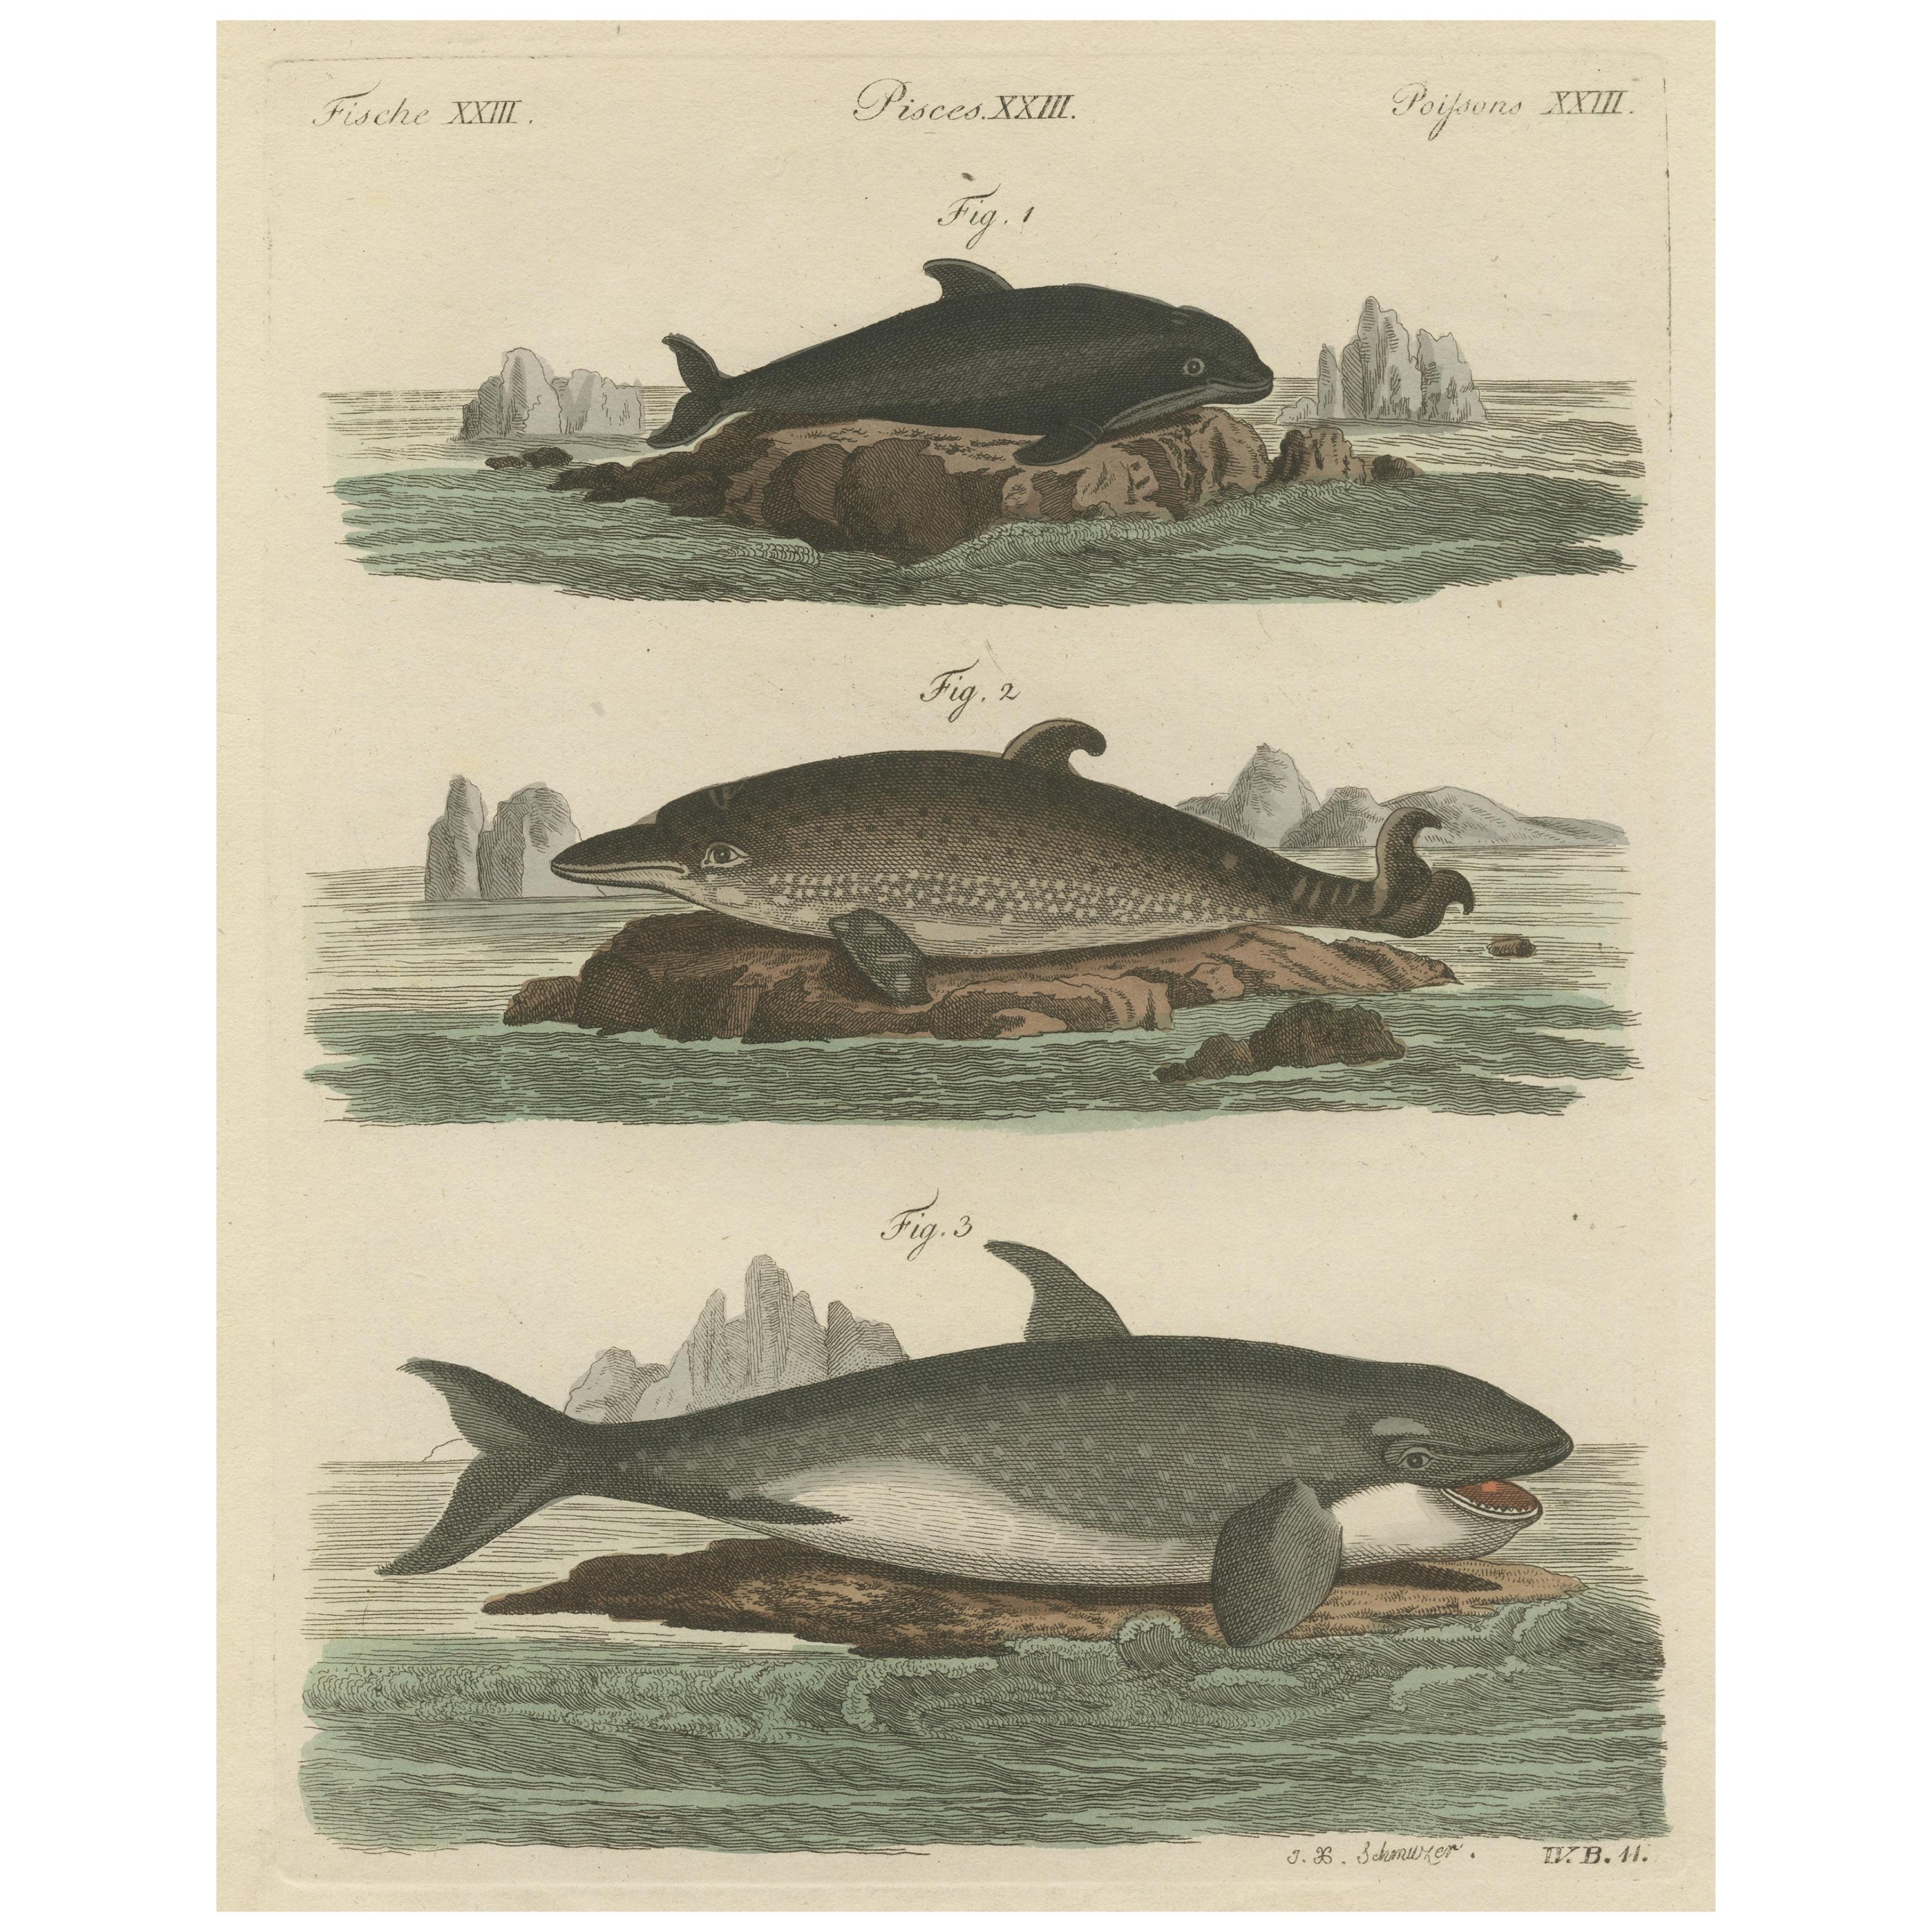 Hand Colored Engraving of a Harbour Porpoise and Other Marine Life For Sale